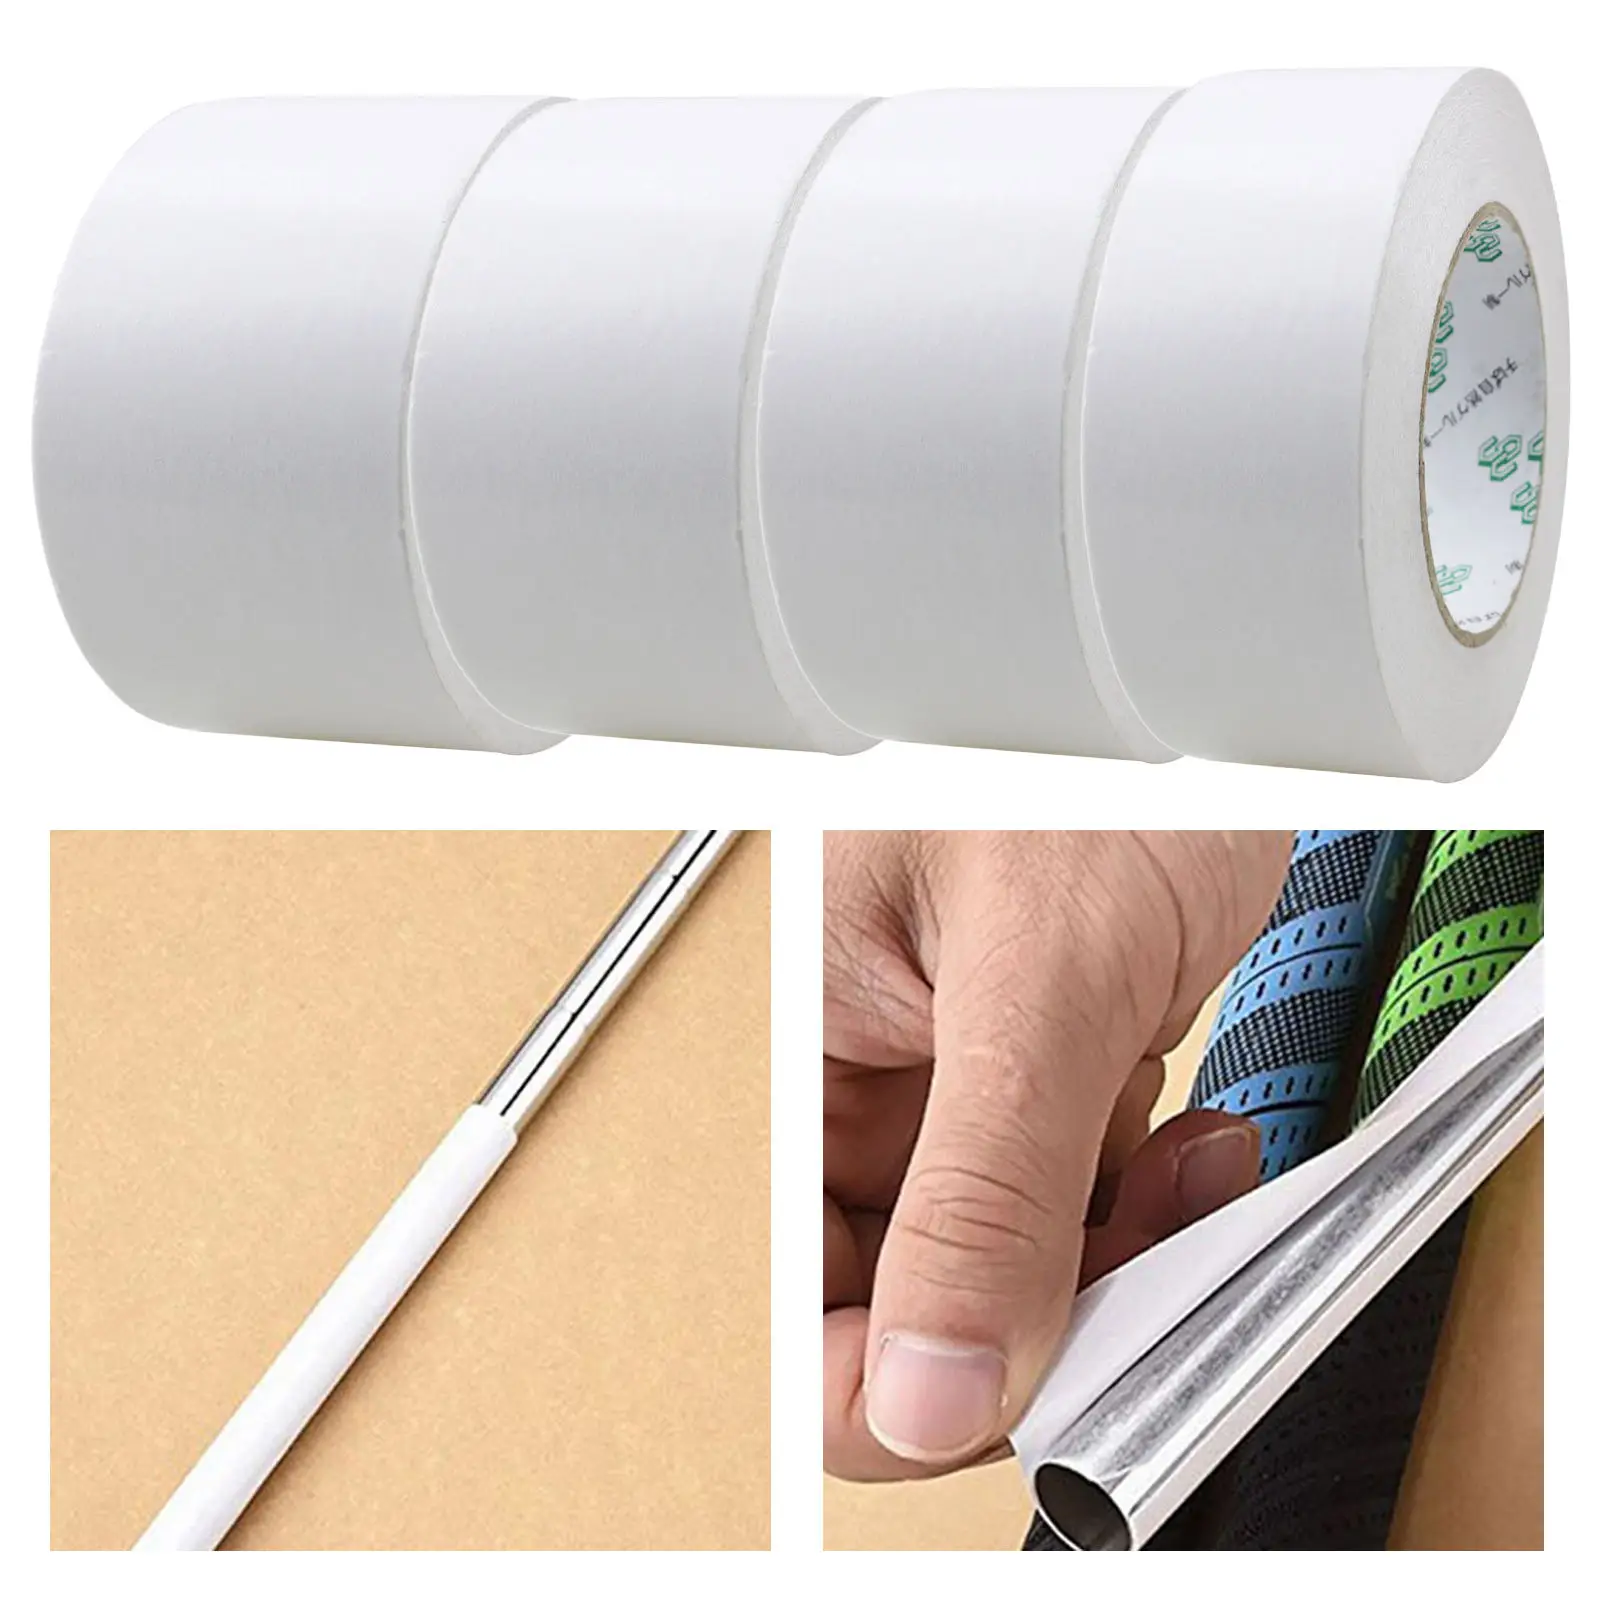 

50M/Roll Double Sided Golf Grip Tape Adhesive For Golf Clubs Grip Installation Golf Grip Strip Putter Tape Golf Shaft Protector